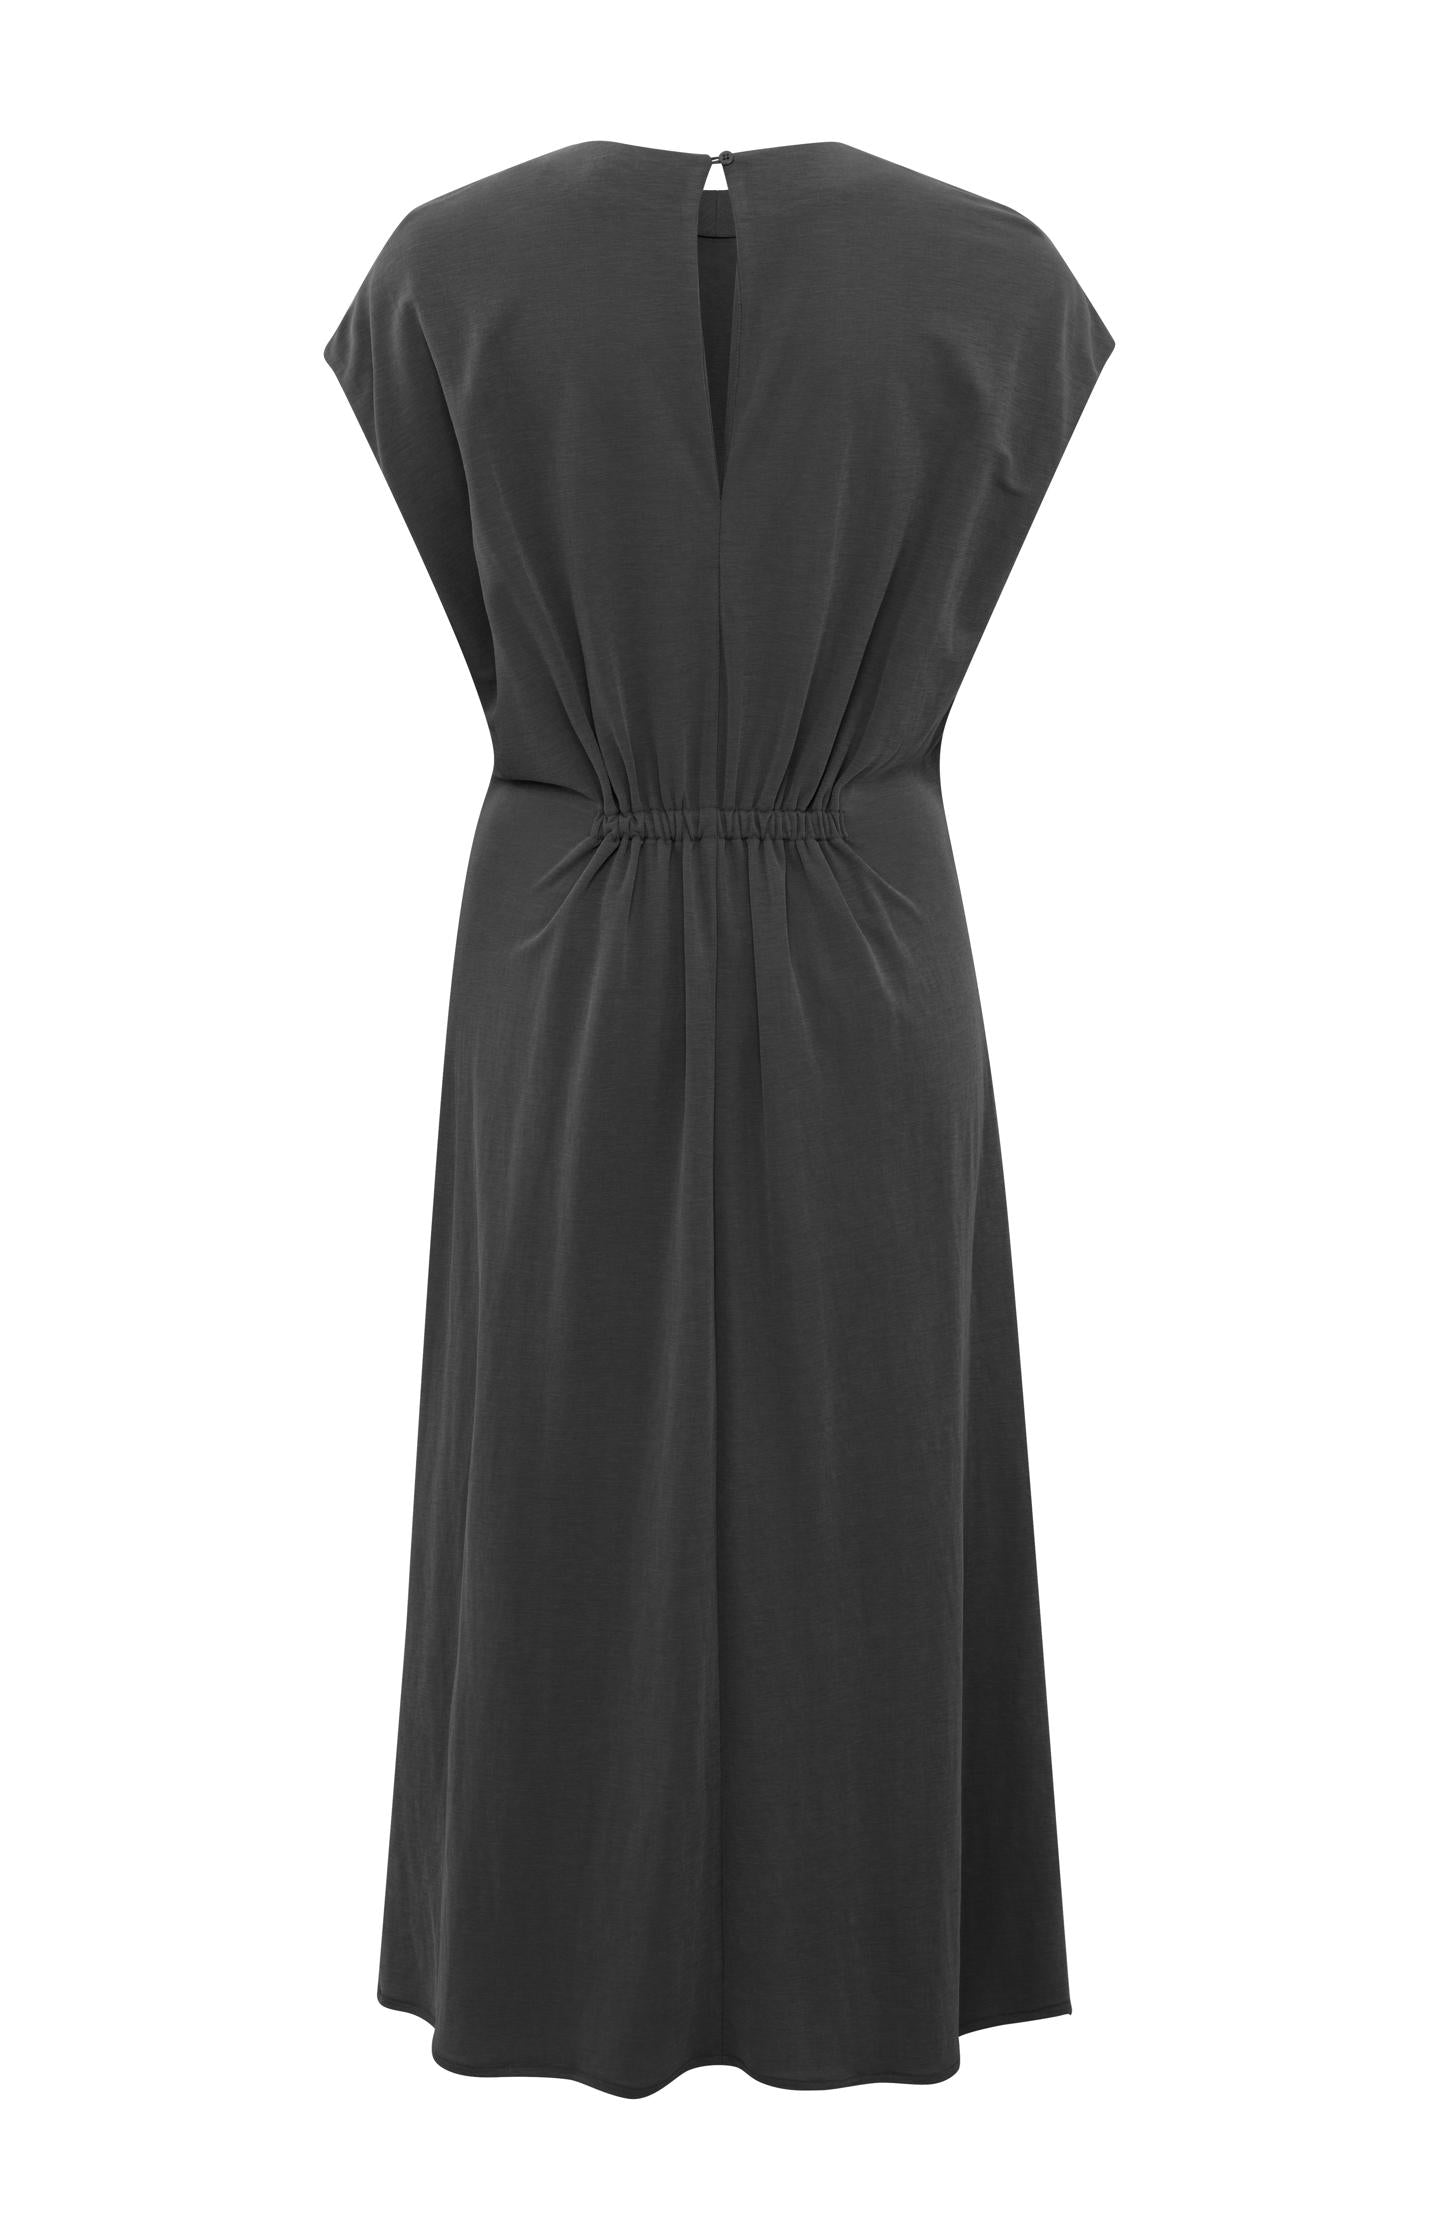 Midi dress with cap sleeves, faux wrap and pleated details